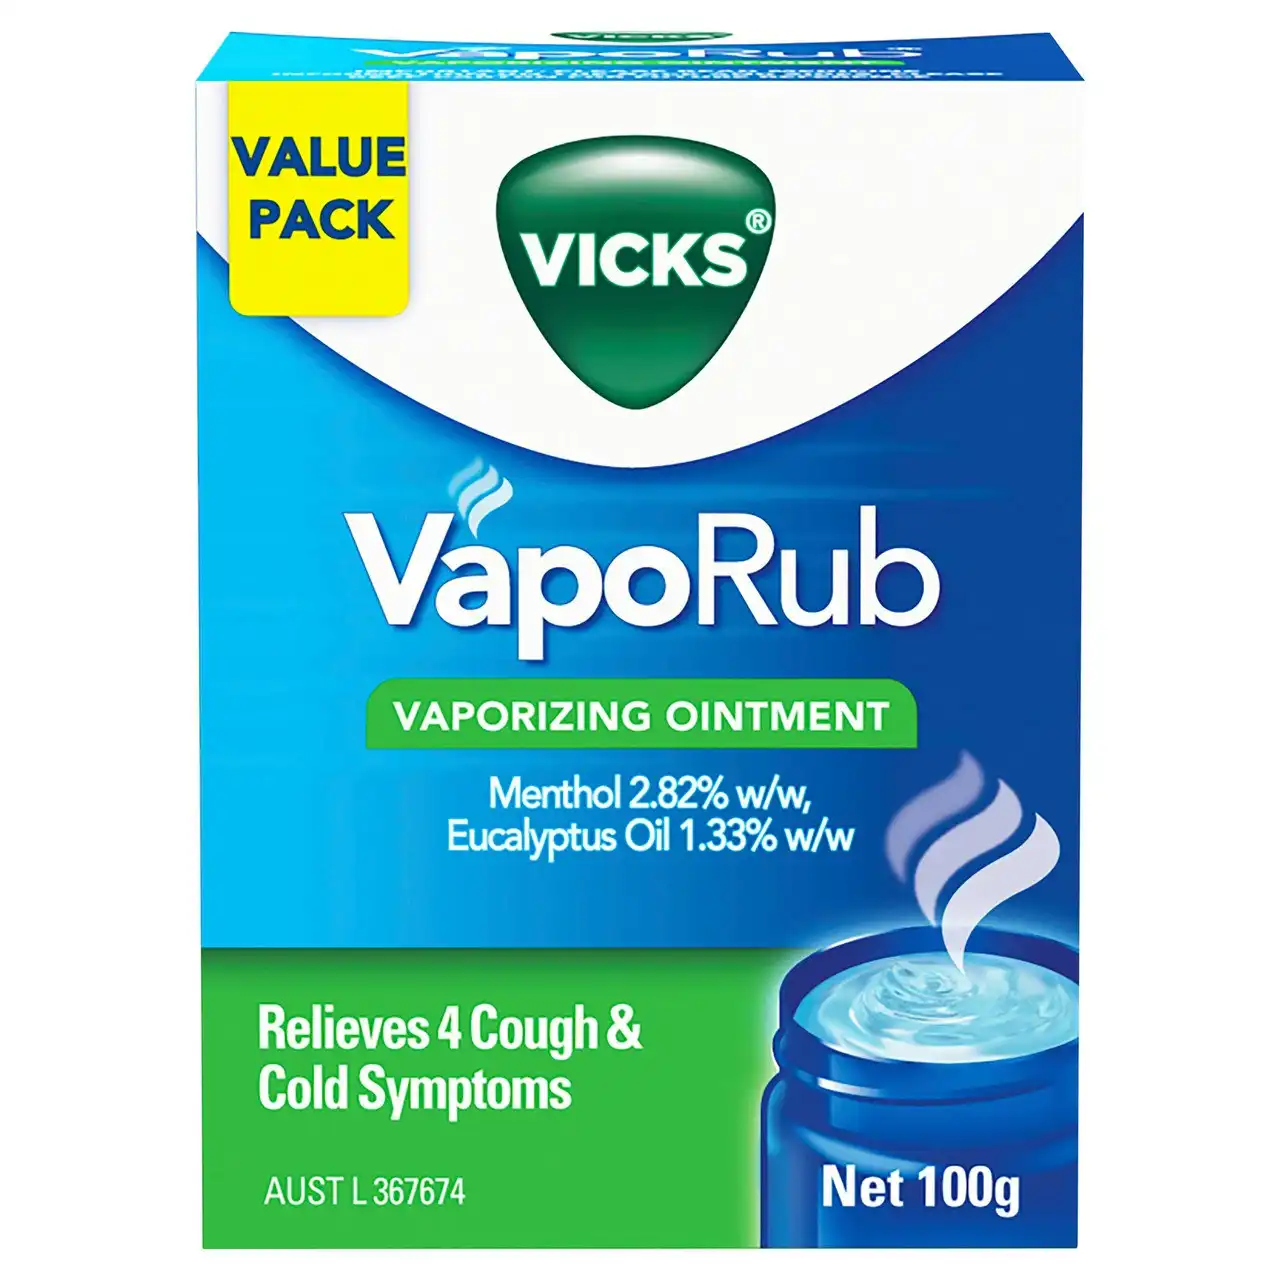 Vicks VapoRub Vaporizing Ointment Relief from Cough & Cold Symptoms 100g - Cough & Cold